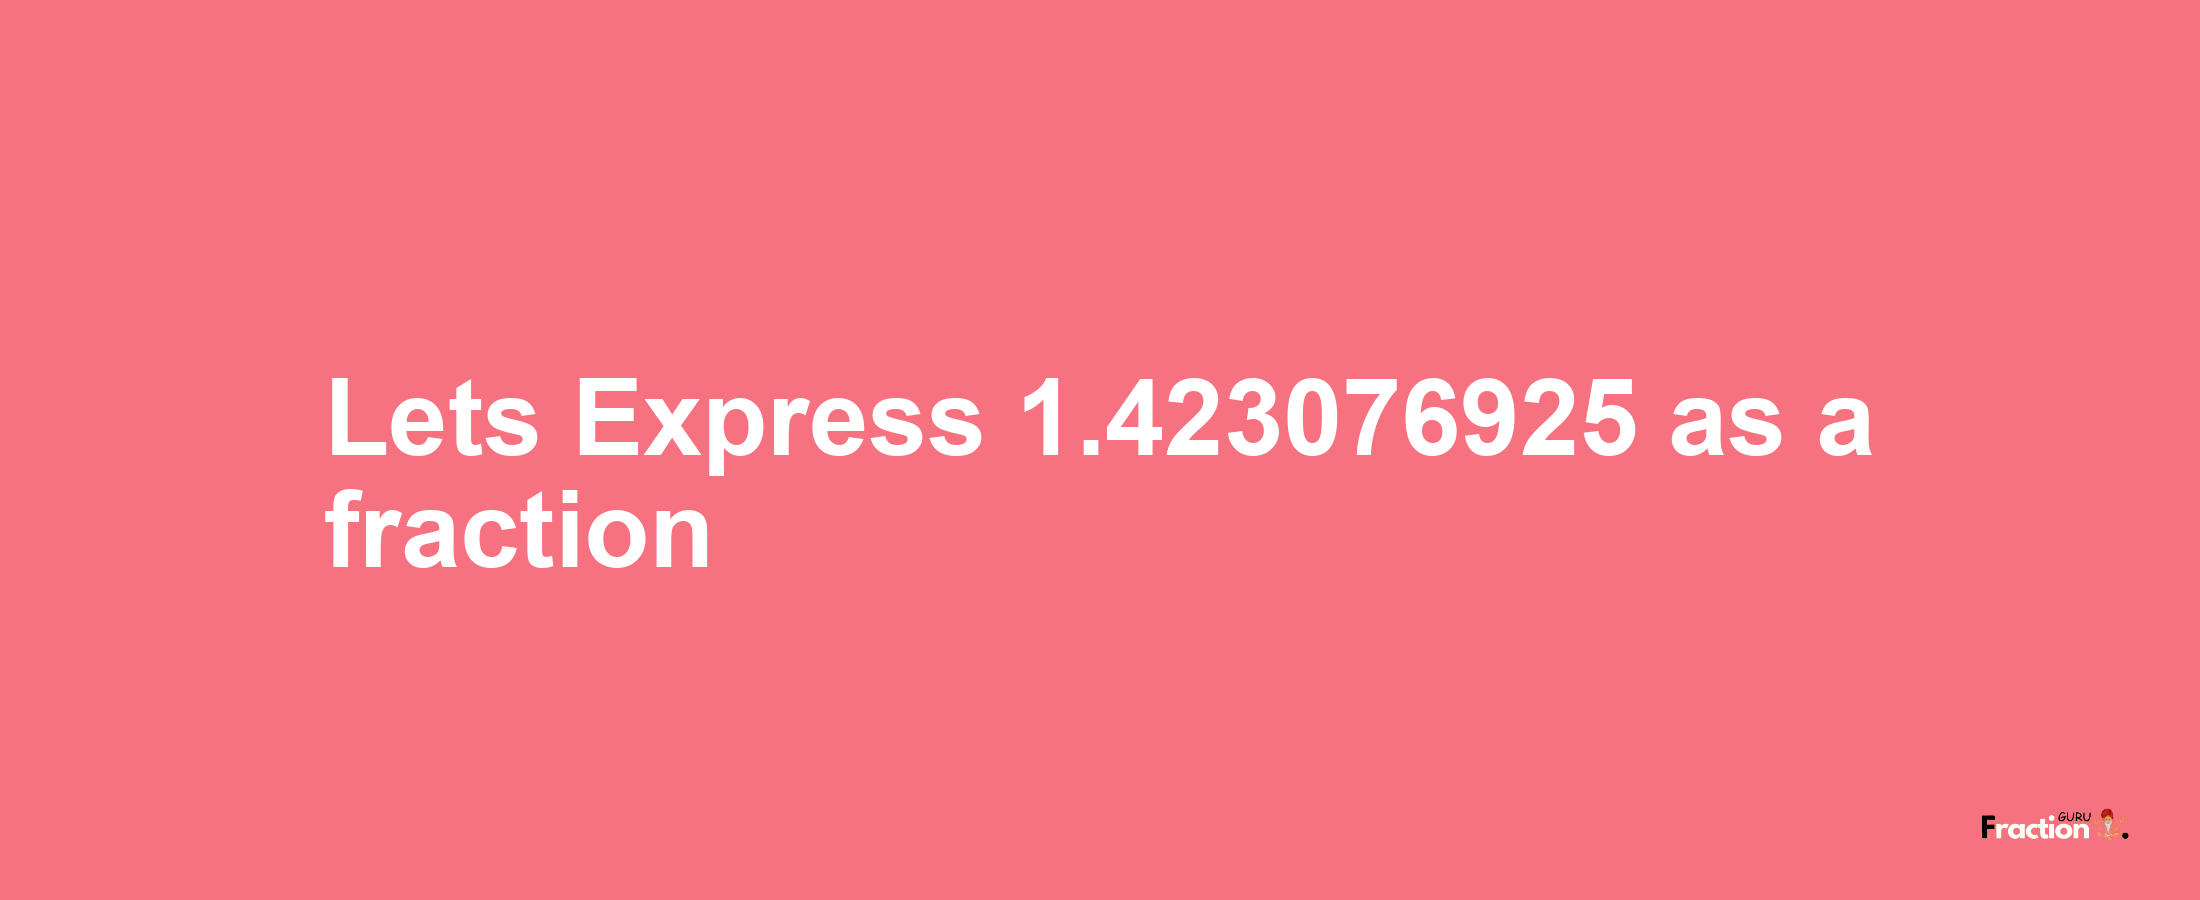 Lets Express 1.423076925 as afraction